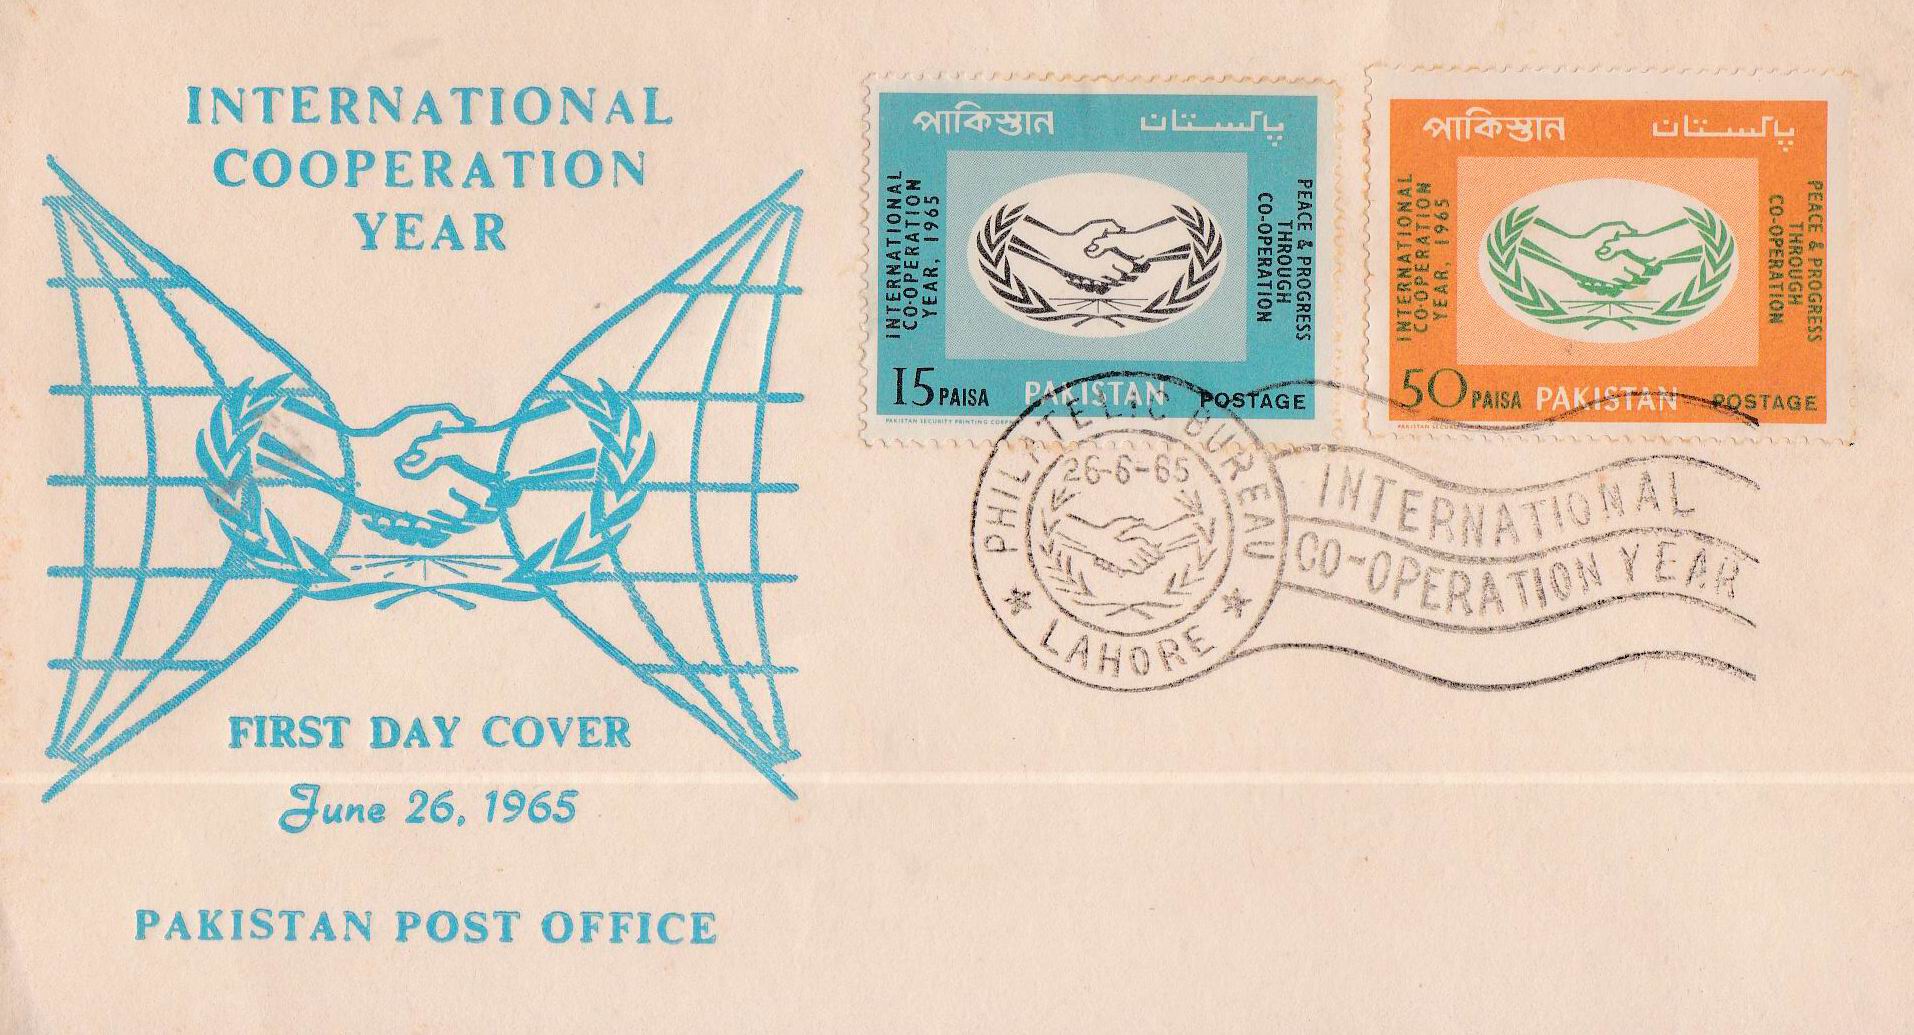 Pakistan Fdc 1965 Brochure & Stamp Intl Co-operation Year - Click Image to Close